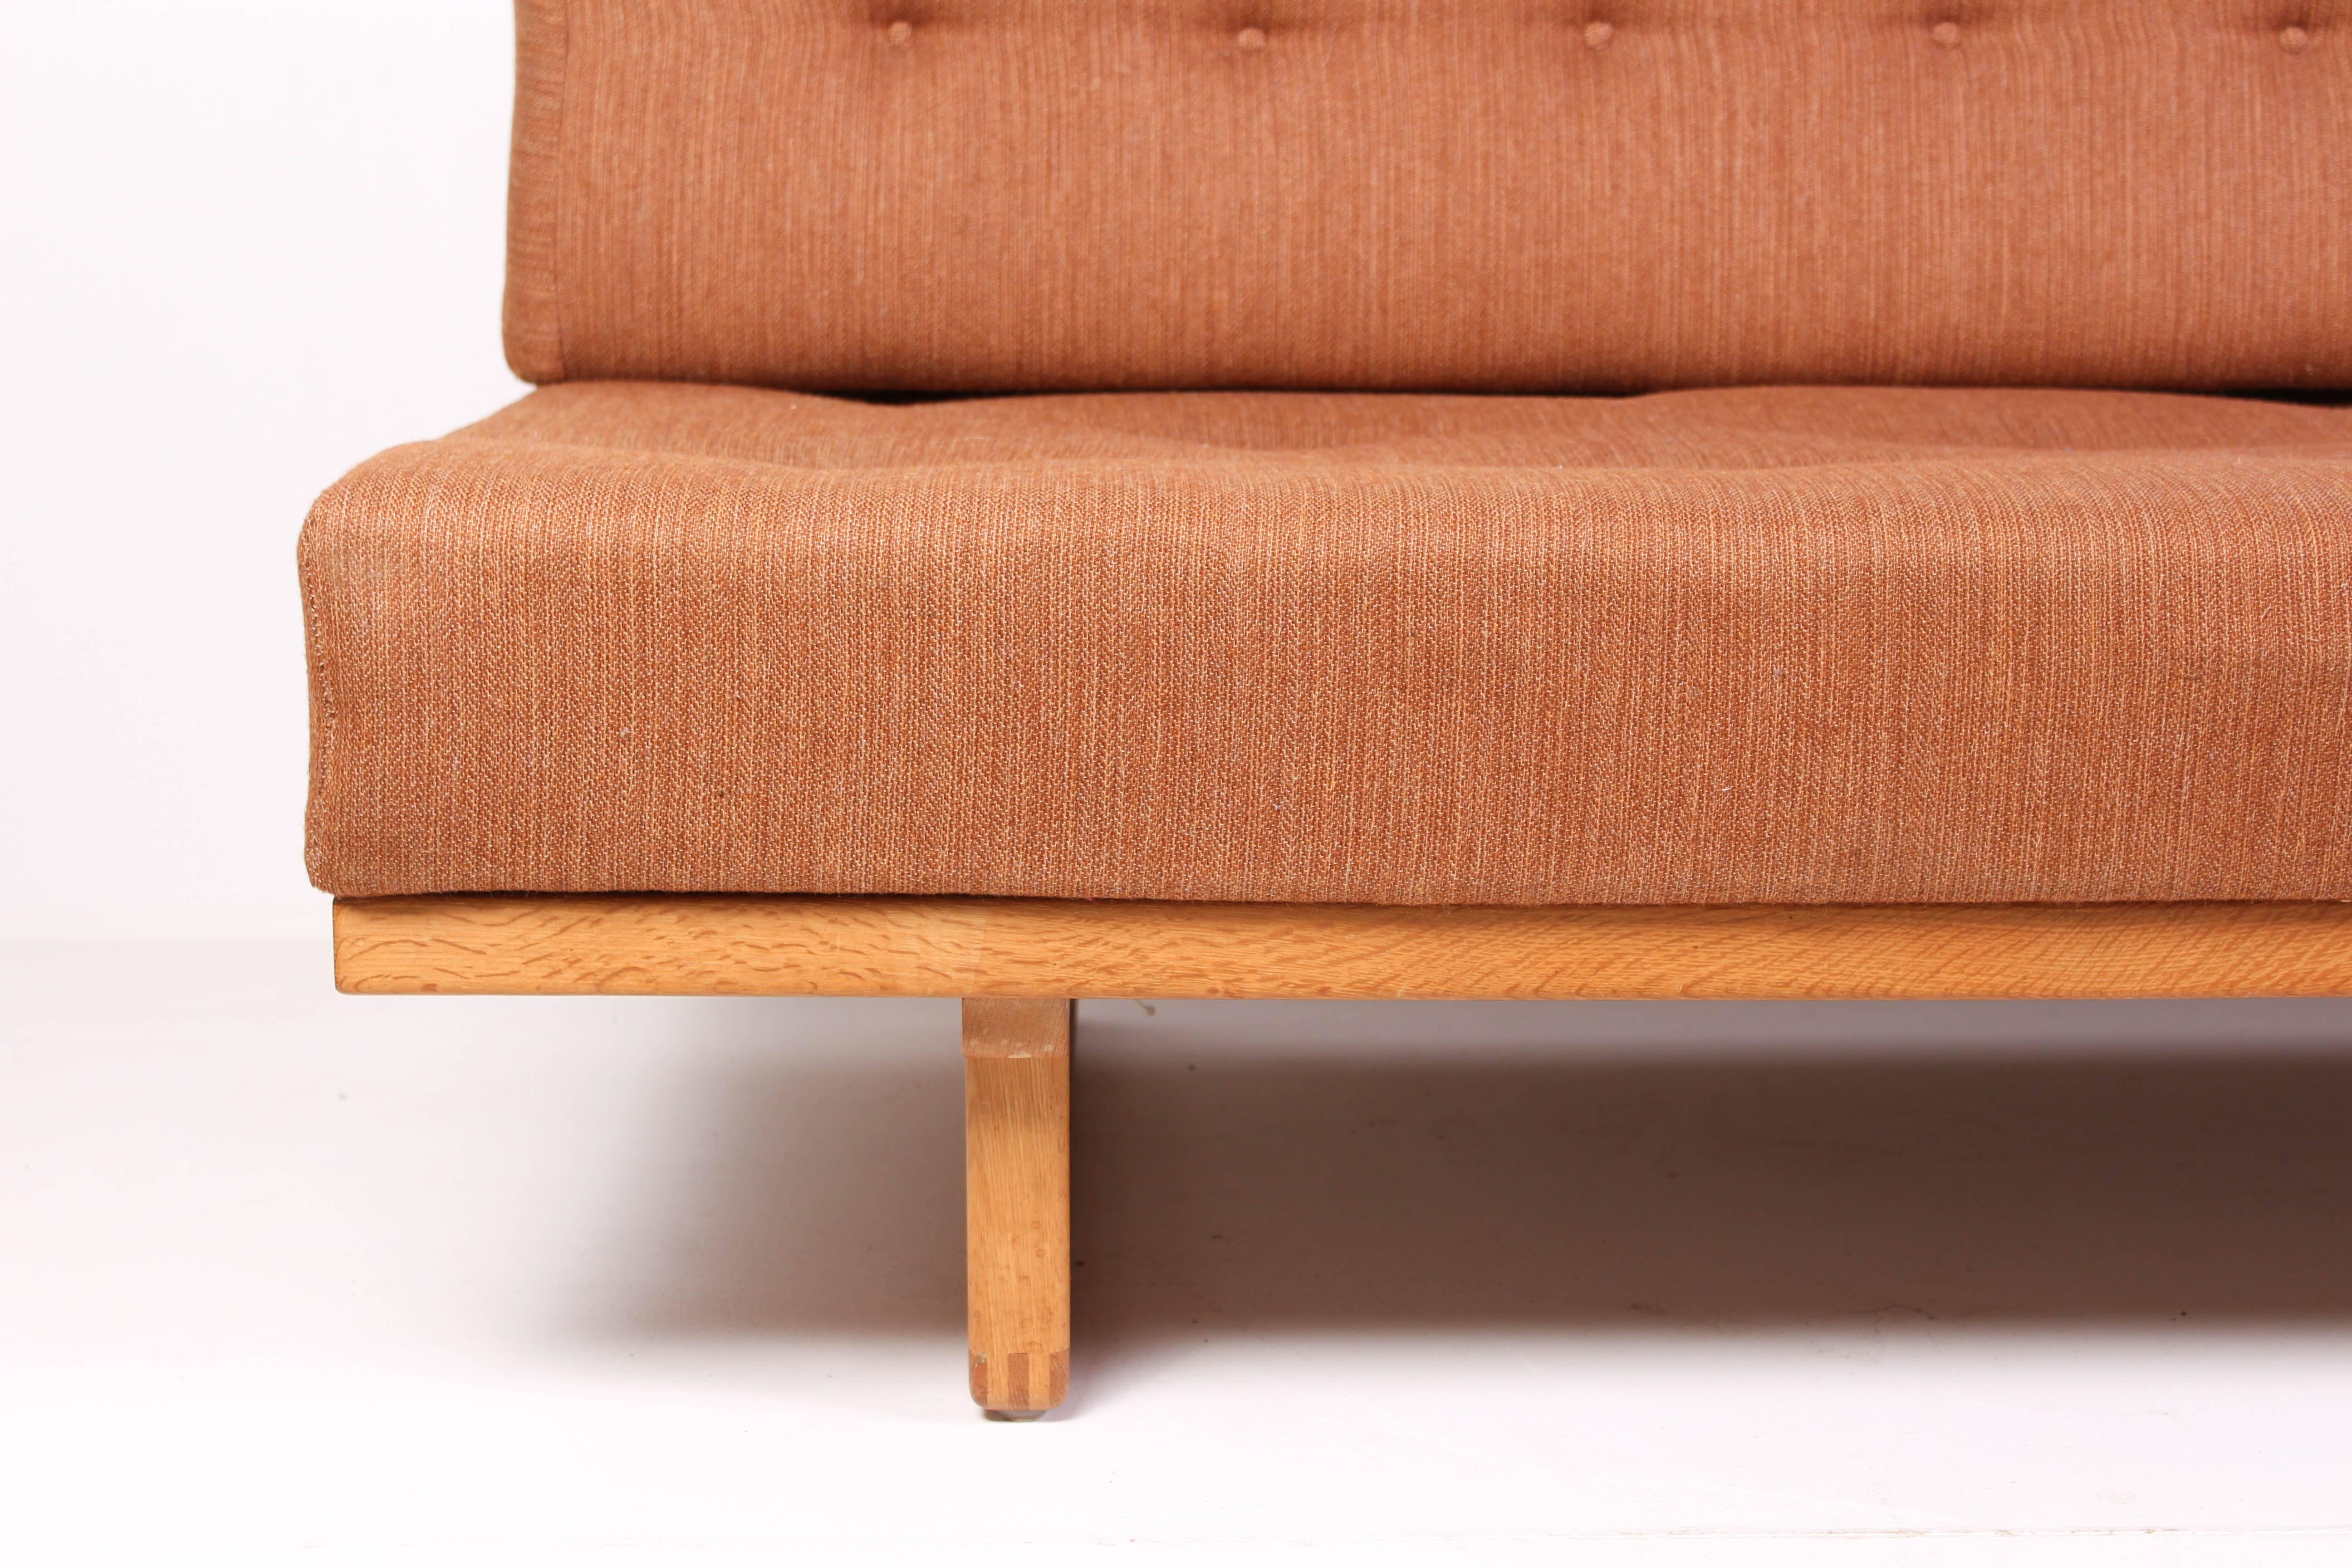 This daybed was designed in 1958 by Danish designer Børge Mogensen and produced by Fredericia Stolefabrik, the model number is 312. It is made out of a solid oak frame with tufted cushions upholstered with wool fabric and brass fittings. The daybed